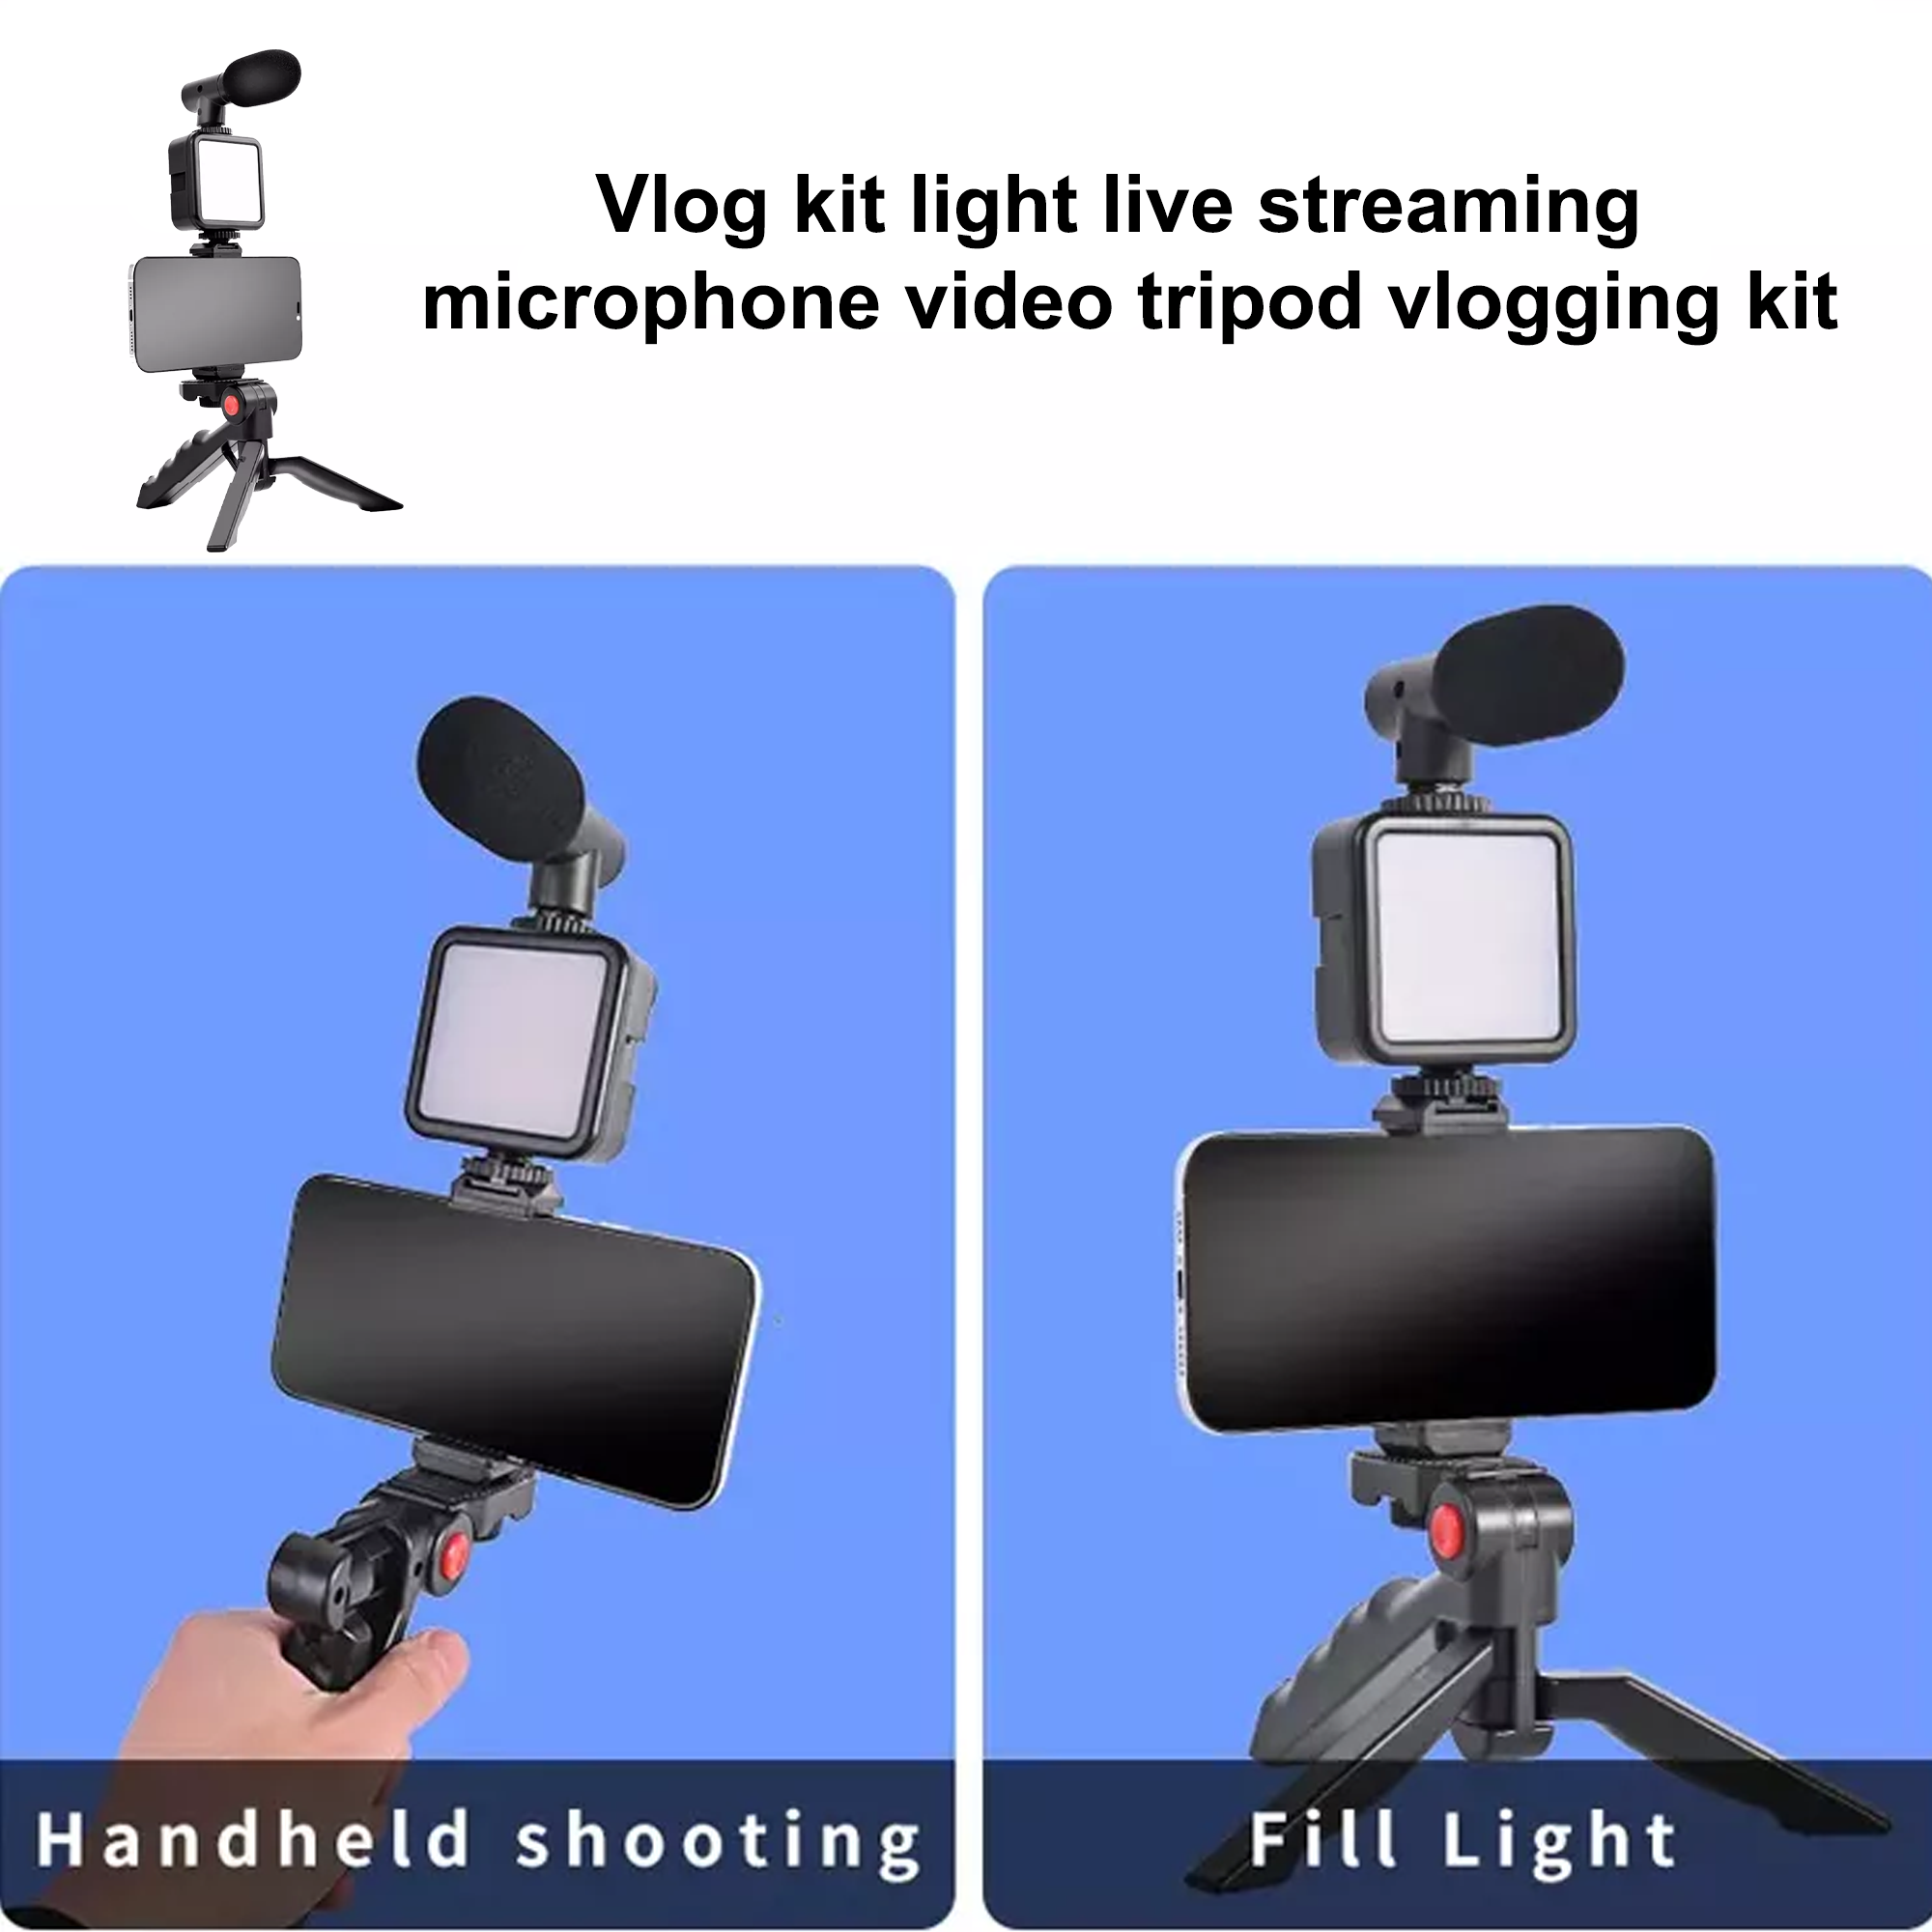 YouTube Vlogging Kit with Tripod & Mic for Mobile Phone - Video Filmmaker Mini Tripod with Shotgun Video Microphone